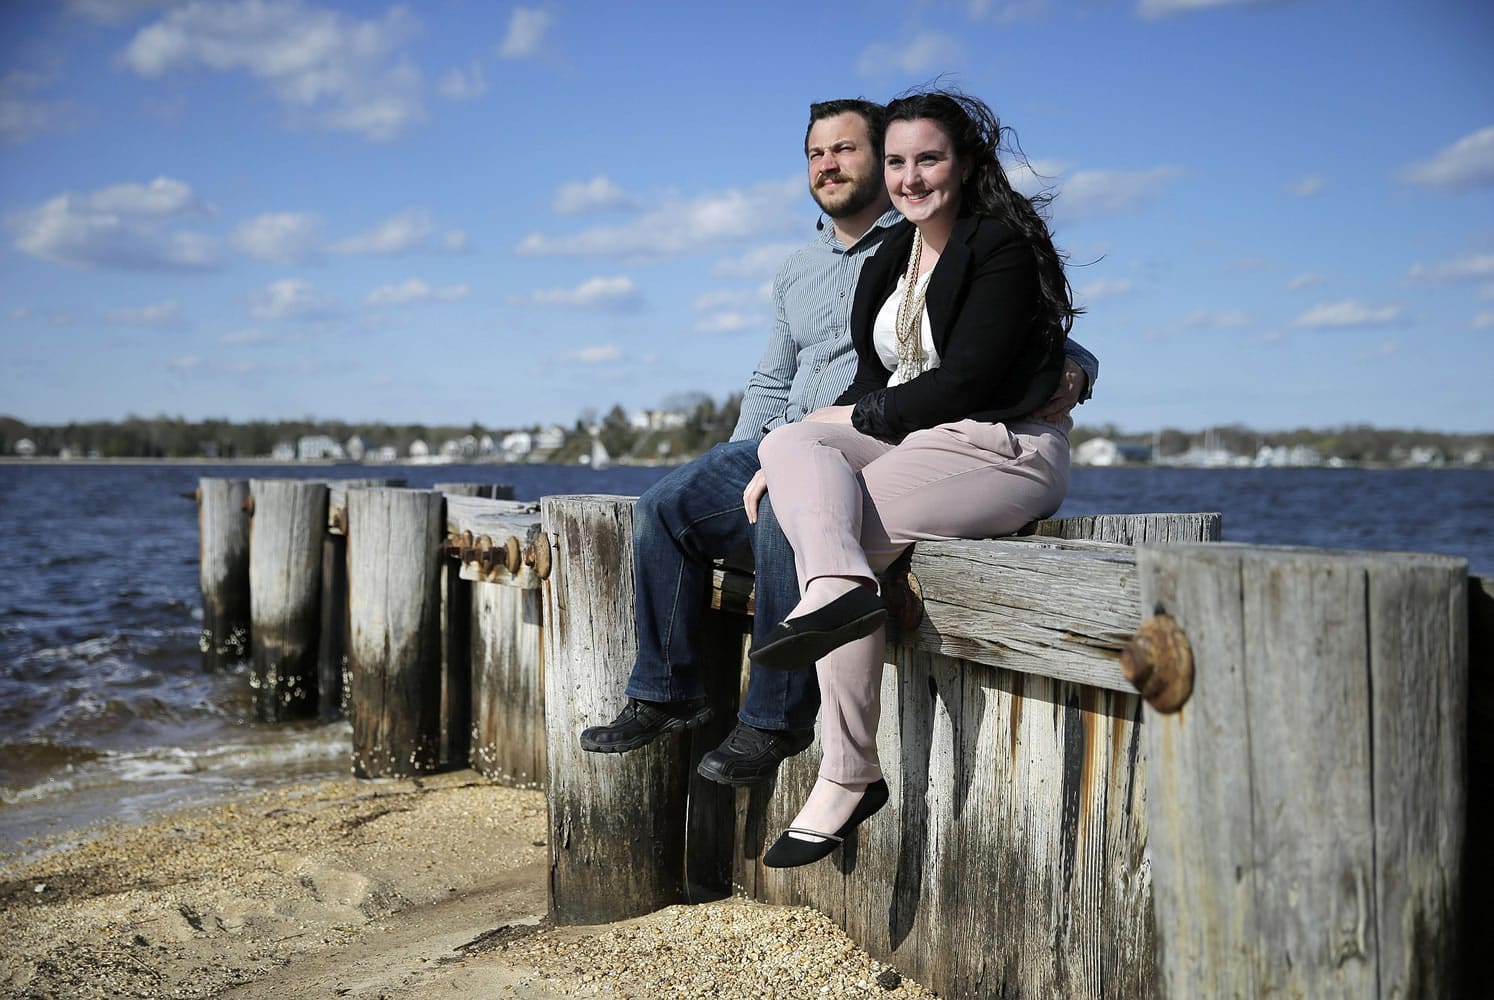 Kate MacHugh and fiance CJ Ecke sit together on a seawall in Pine Beach, N.J. The couple is getting hitched Oct.